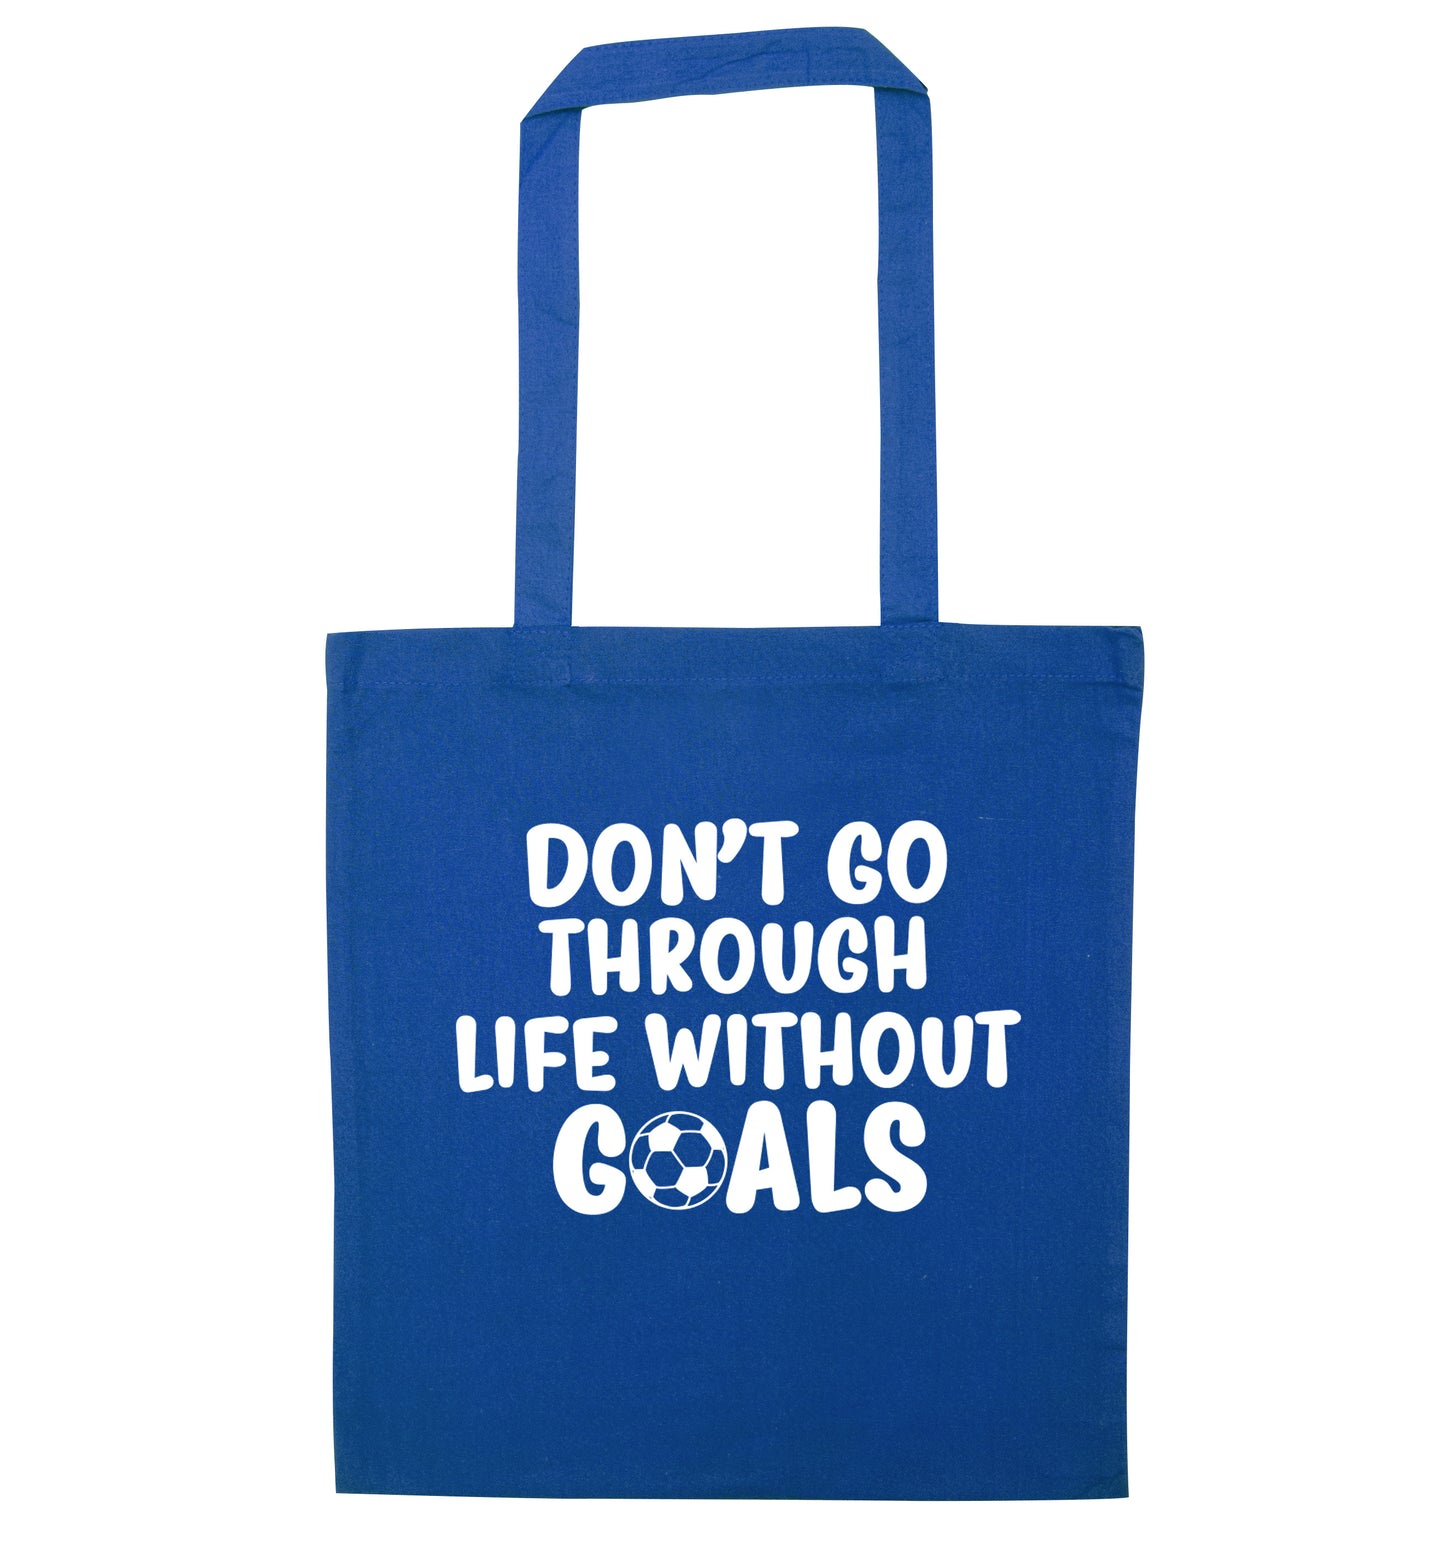 Don't go through life without goals blue tote bag